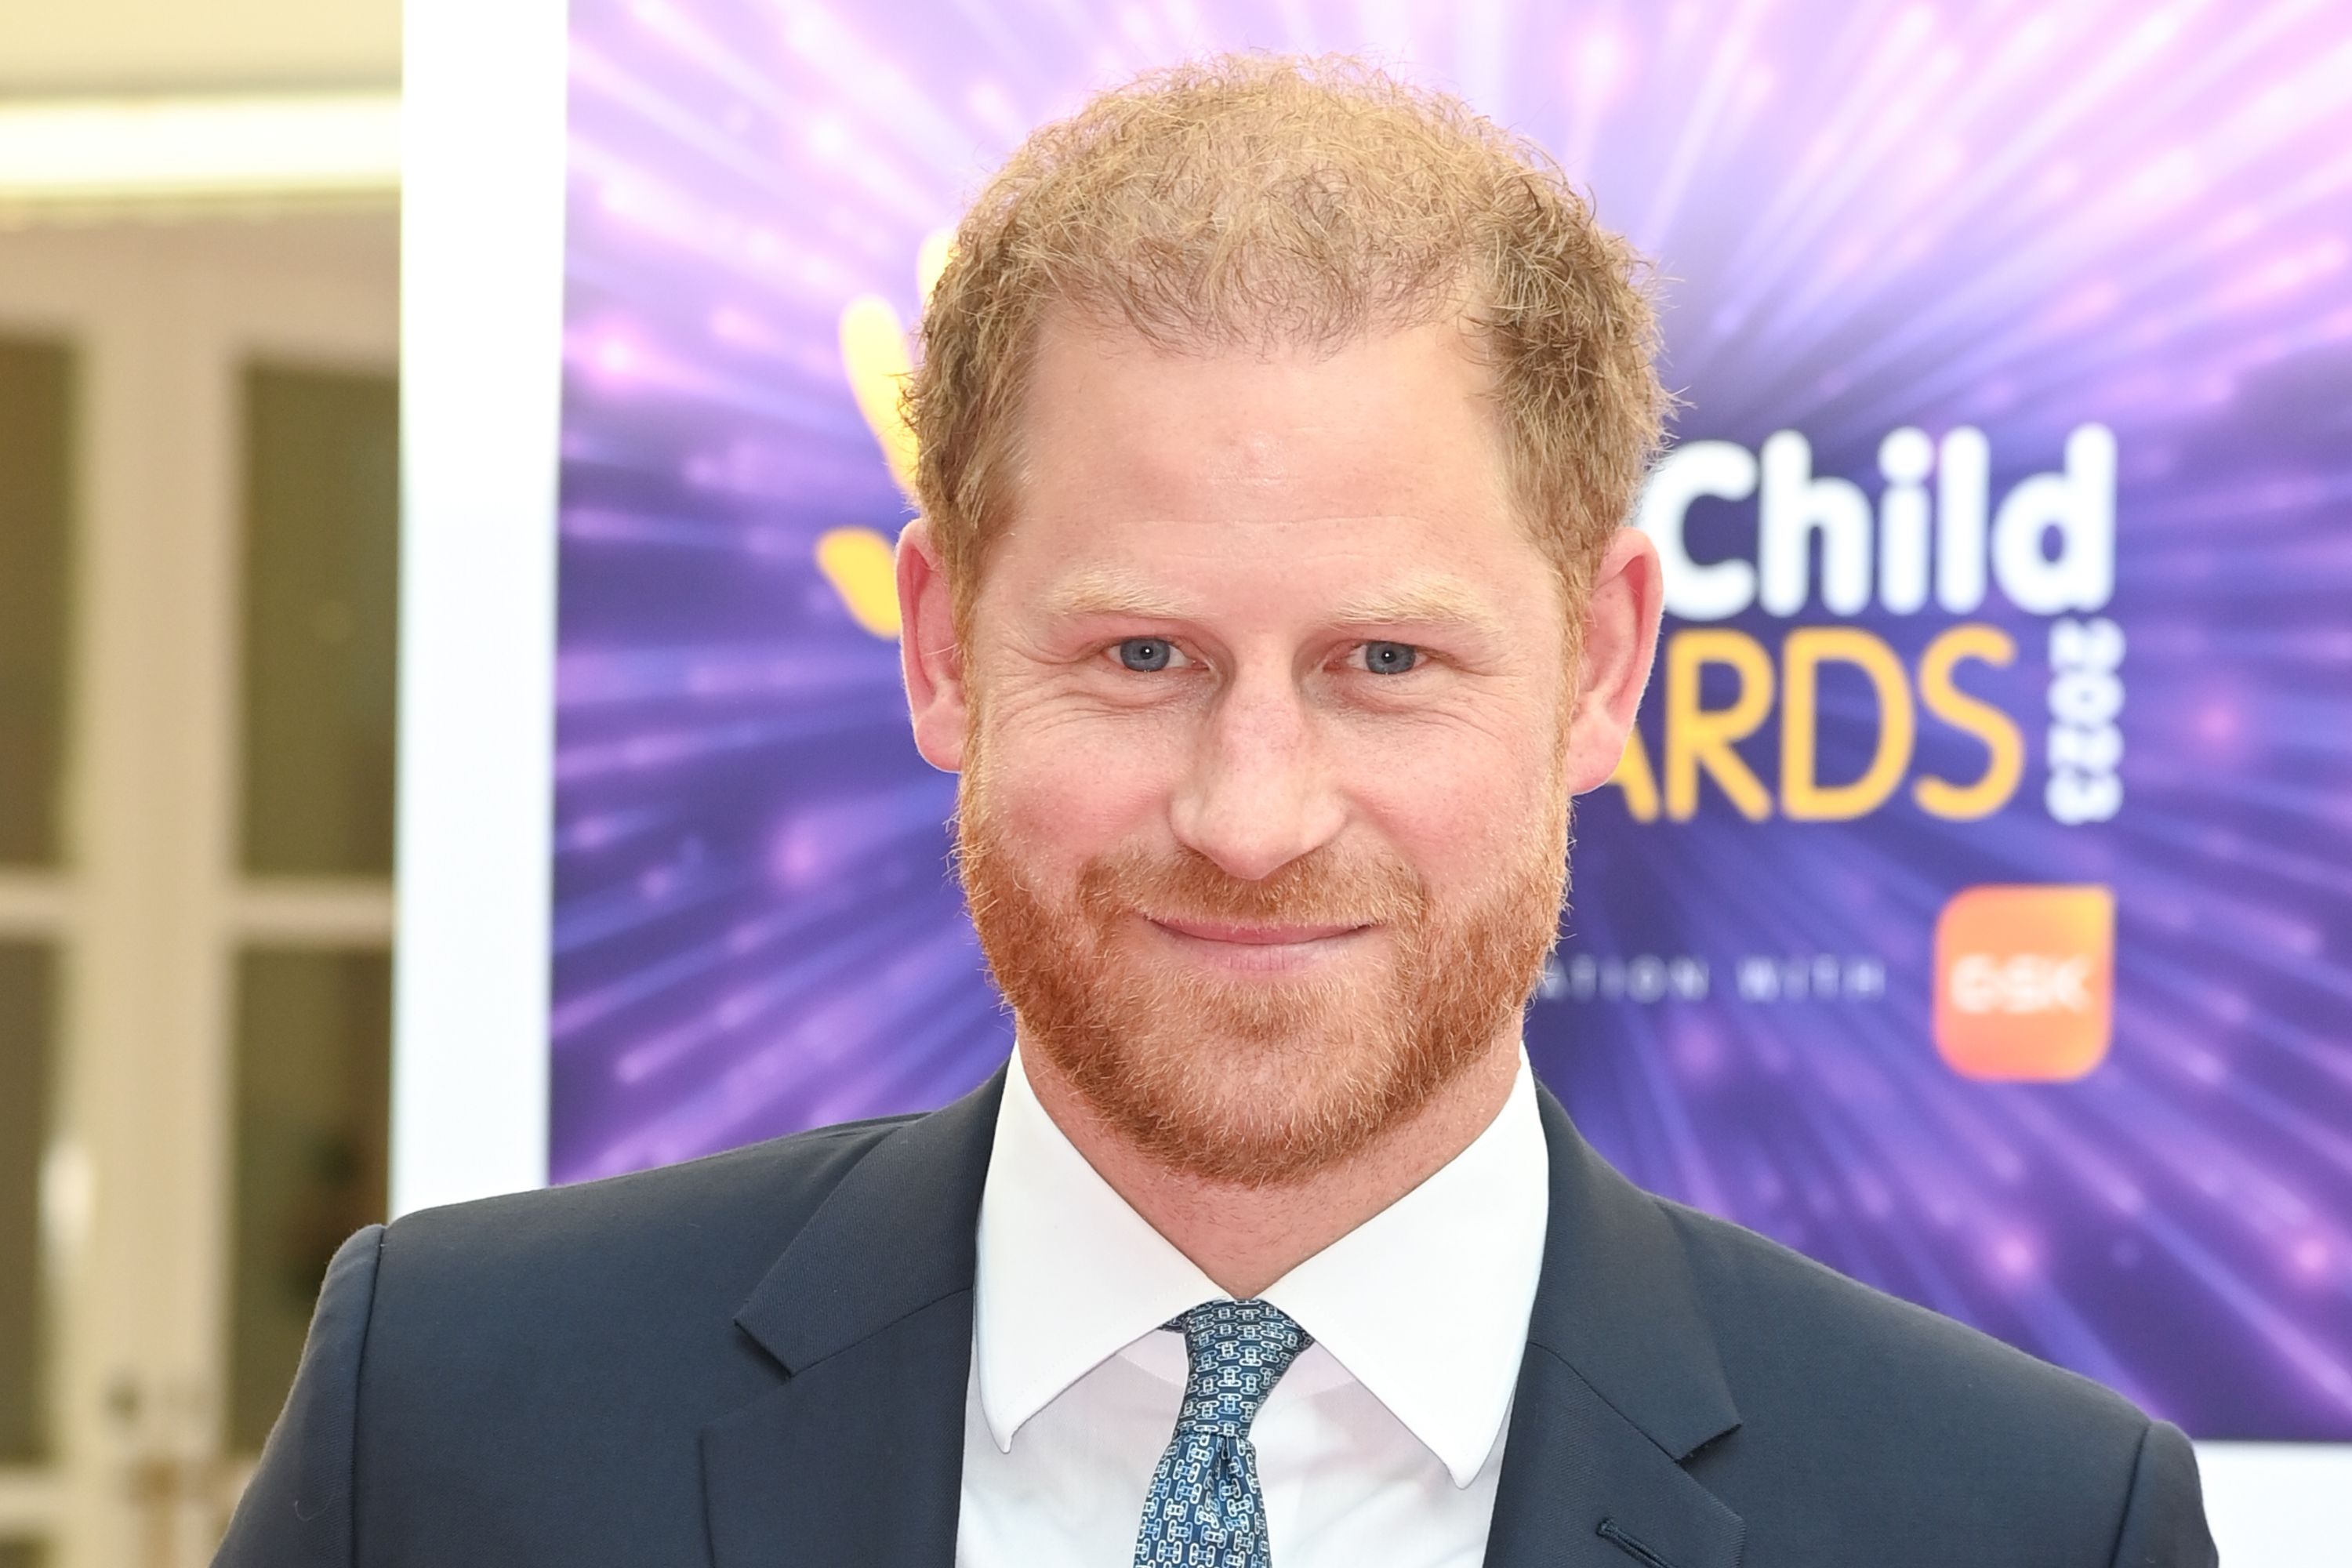 Prince Harry Challenges Security Decision In Britain After U.S. Move